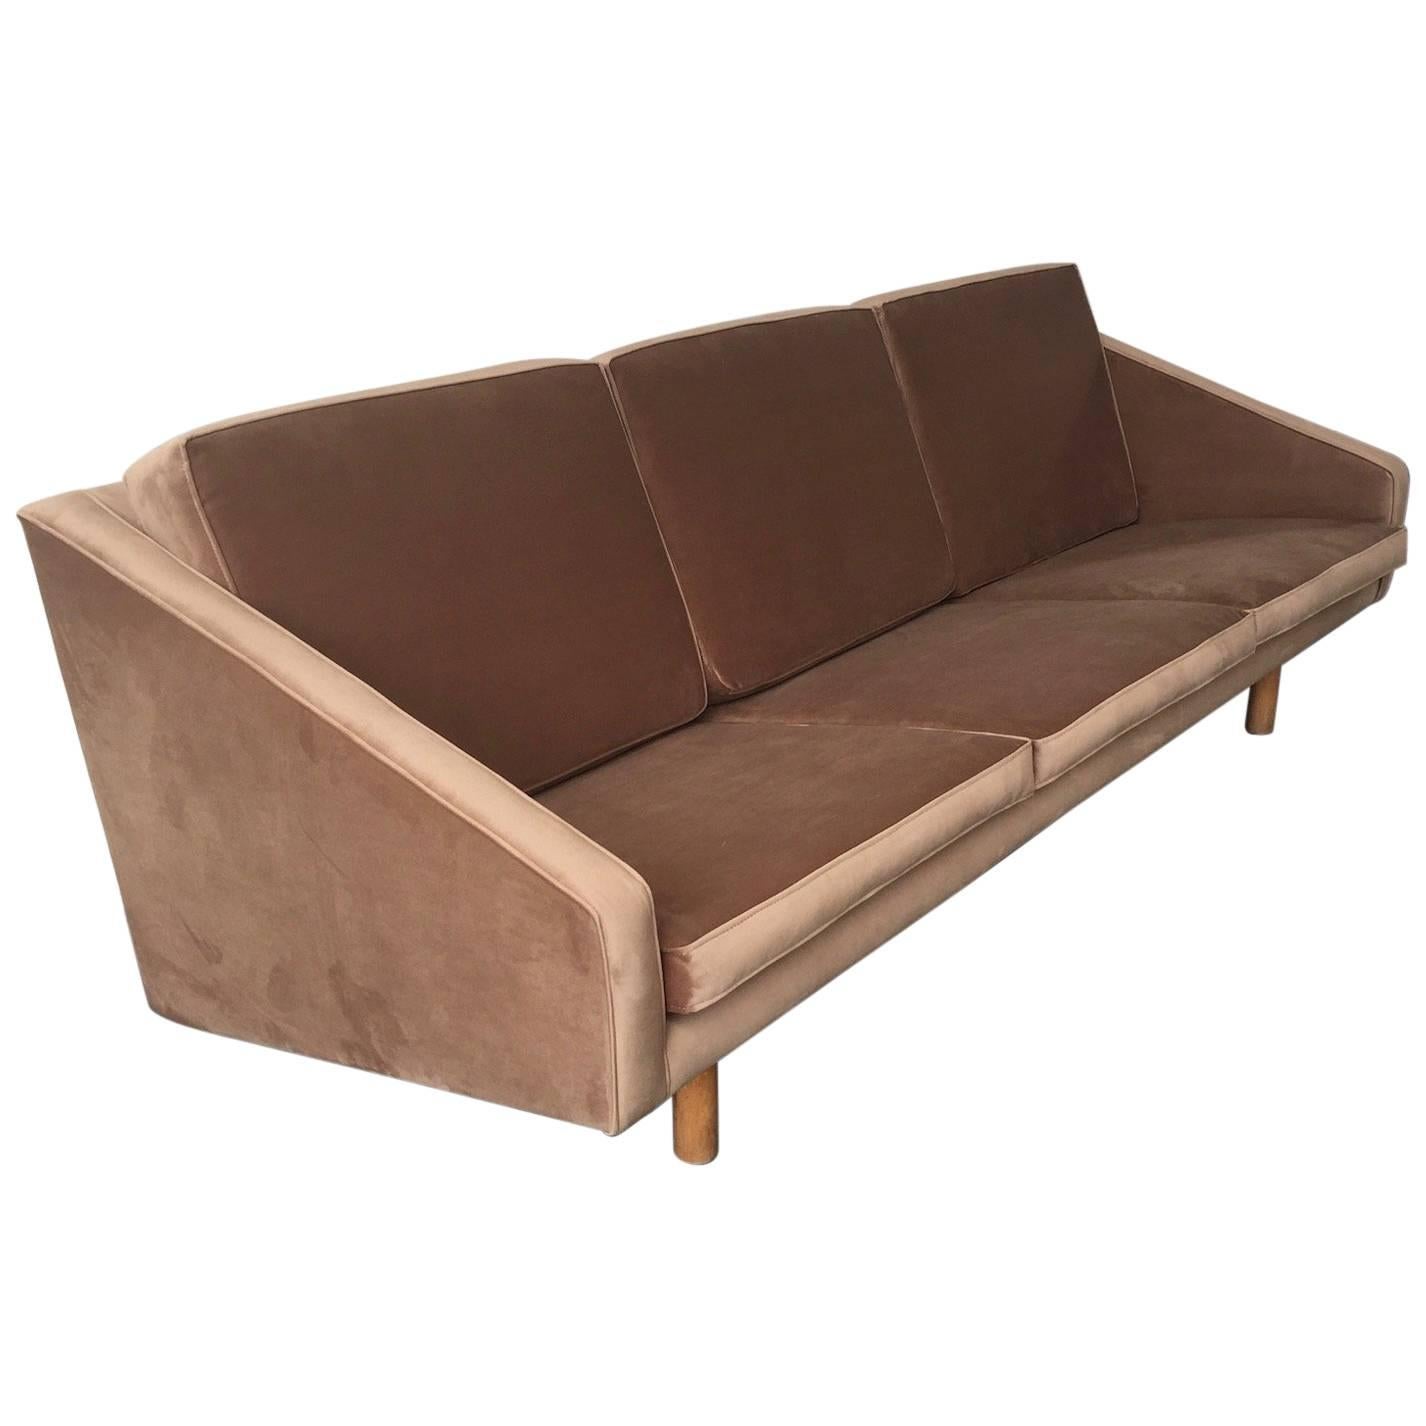 Wonderful Italian Sofa Attributed to Gio Ponti and Completely Re-Upholstered For Sale